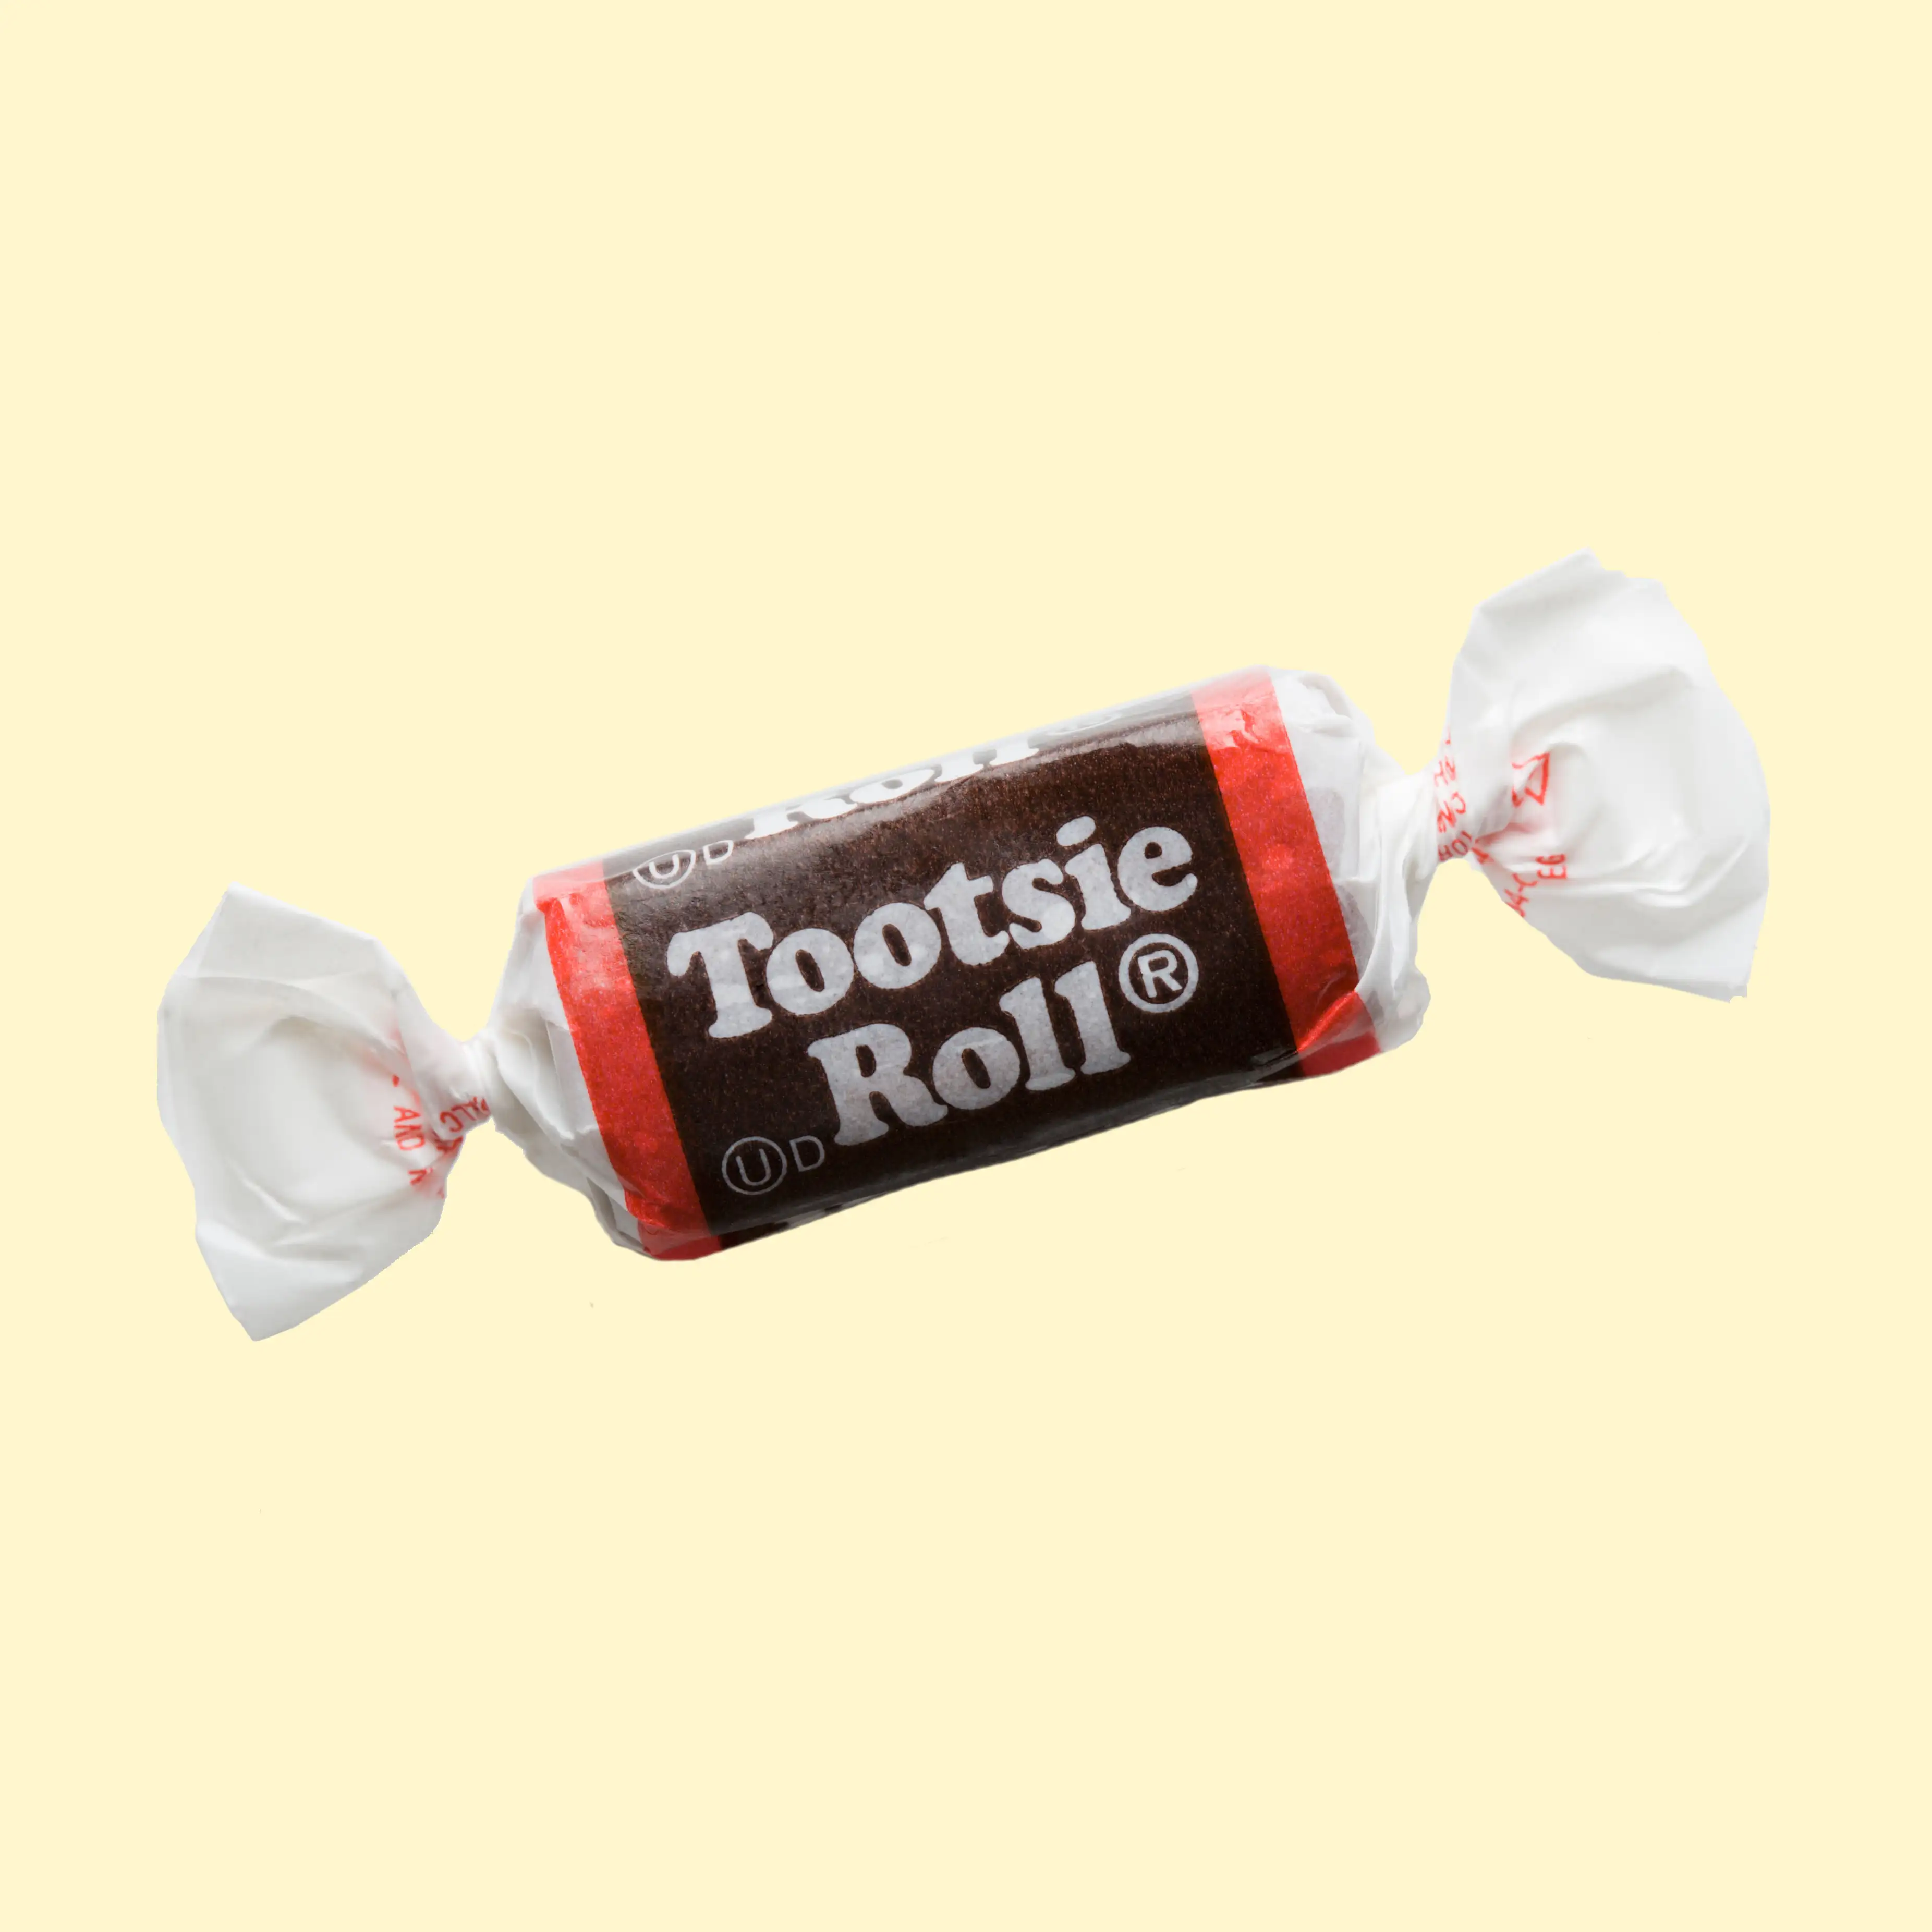 Single Tootsie RollFOR EDITORIAL USE ONLY